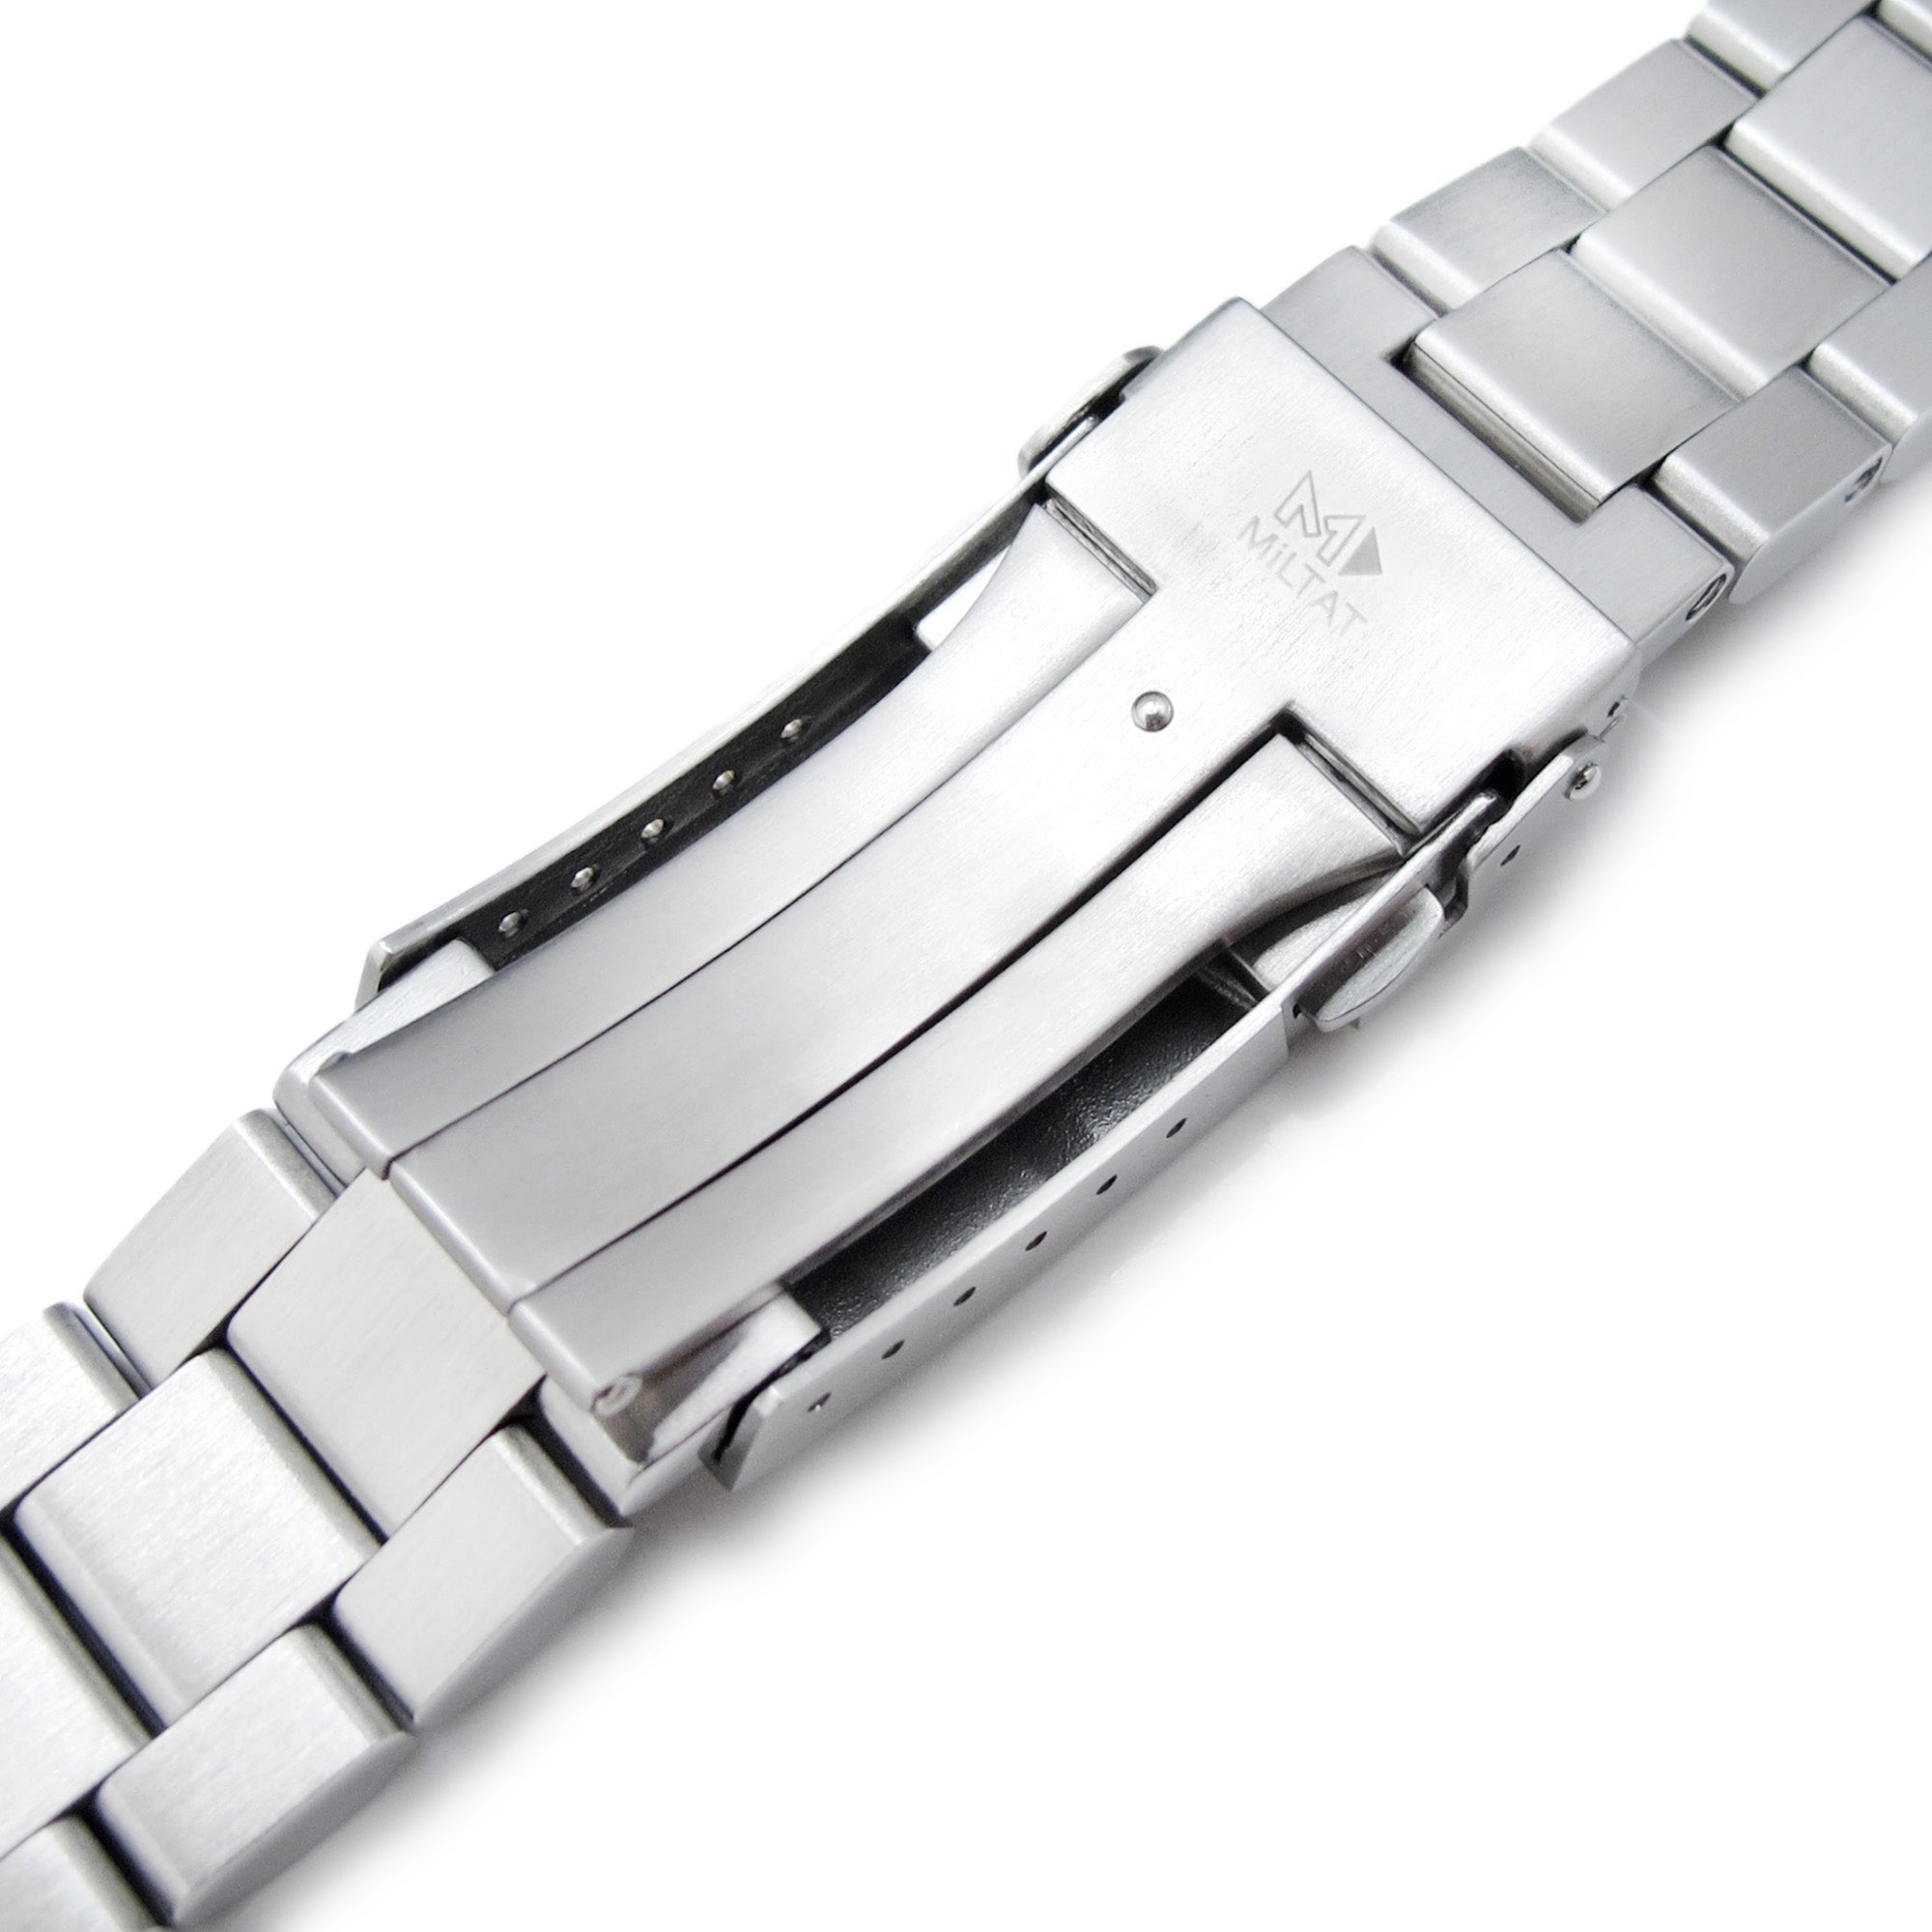 22mm Hexad Watch Band for Seiko King Samurai SRPE33, 316L Stainless Steel Brushed SUB Clasp Strapcode Watch Bands